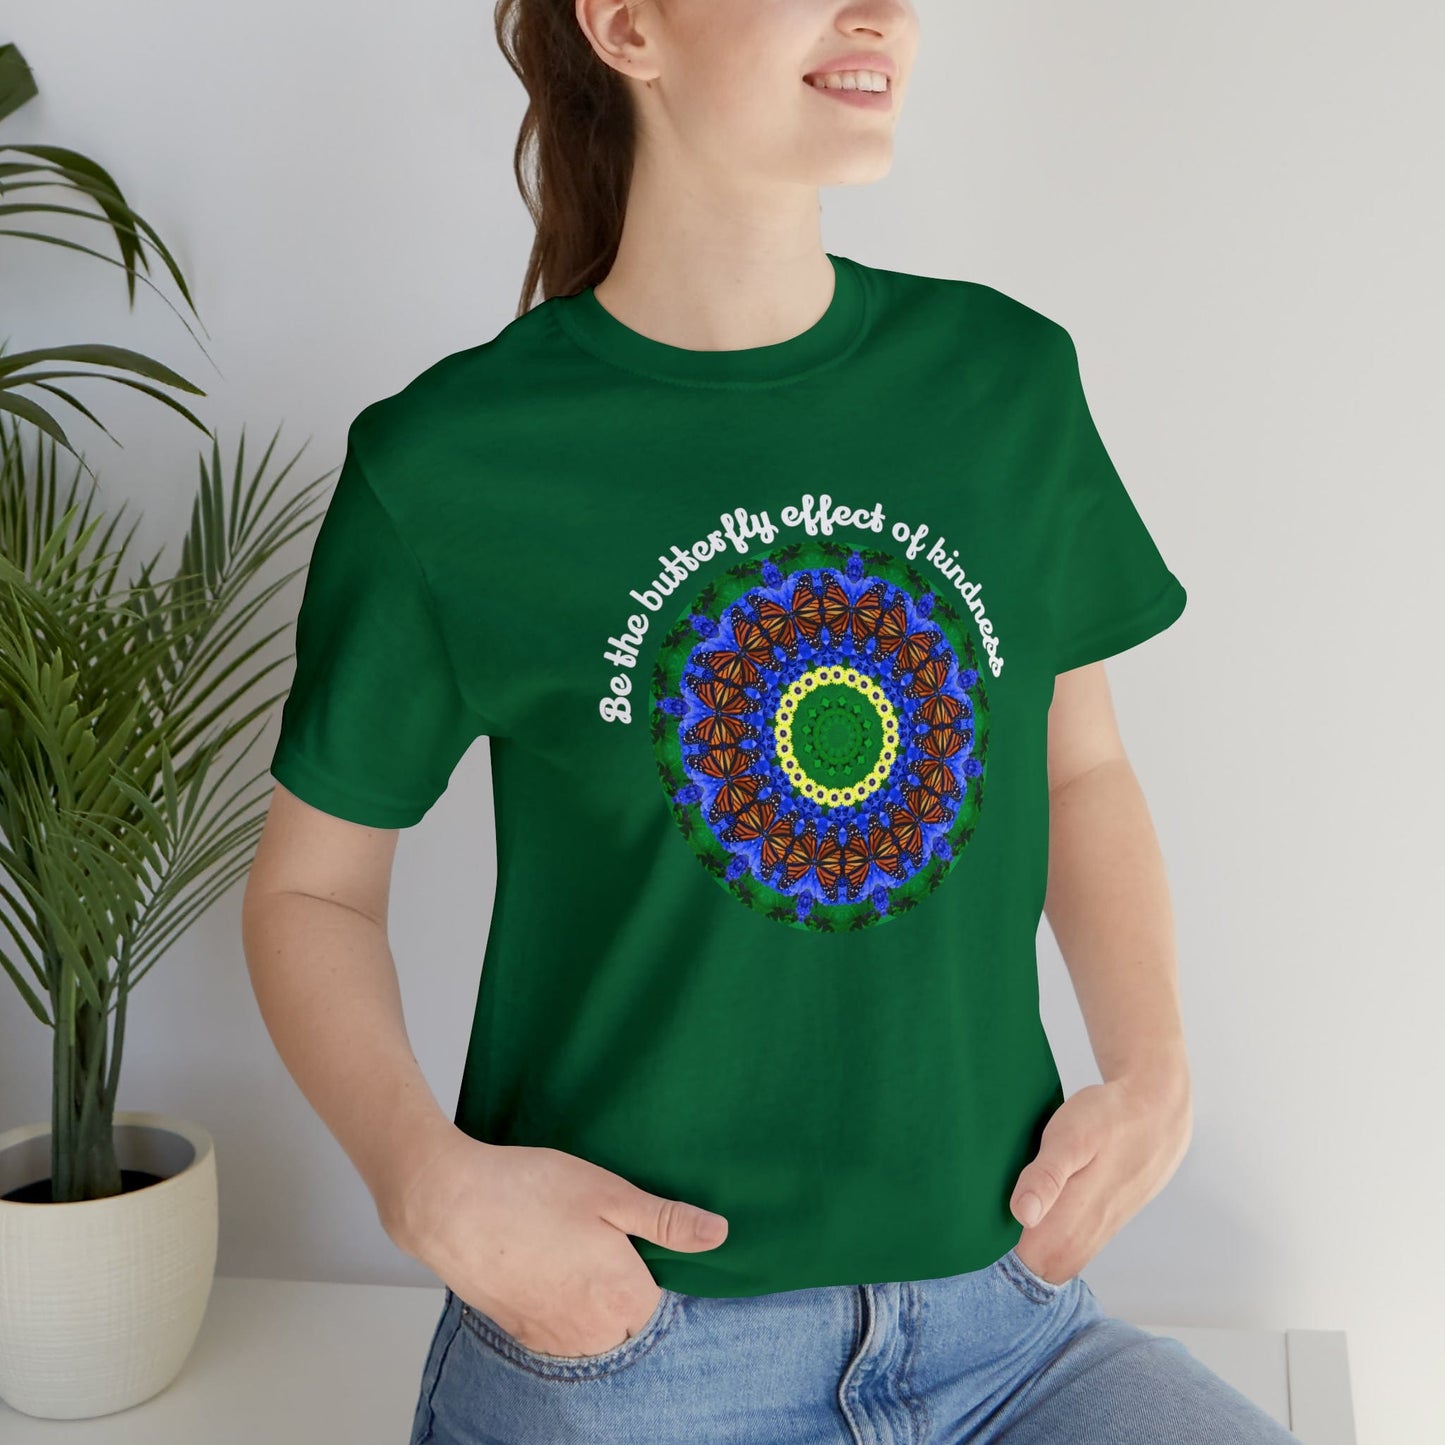 Cute Graphic Kindness Shirts  - Beautiful Monarch Butterfly Mandala Art For Positive Vibes – Butterfly Effect Kelly Green